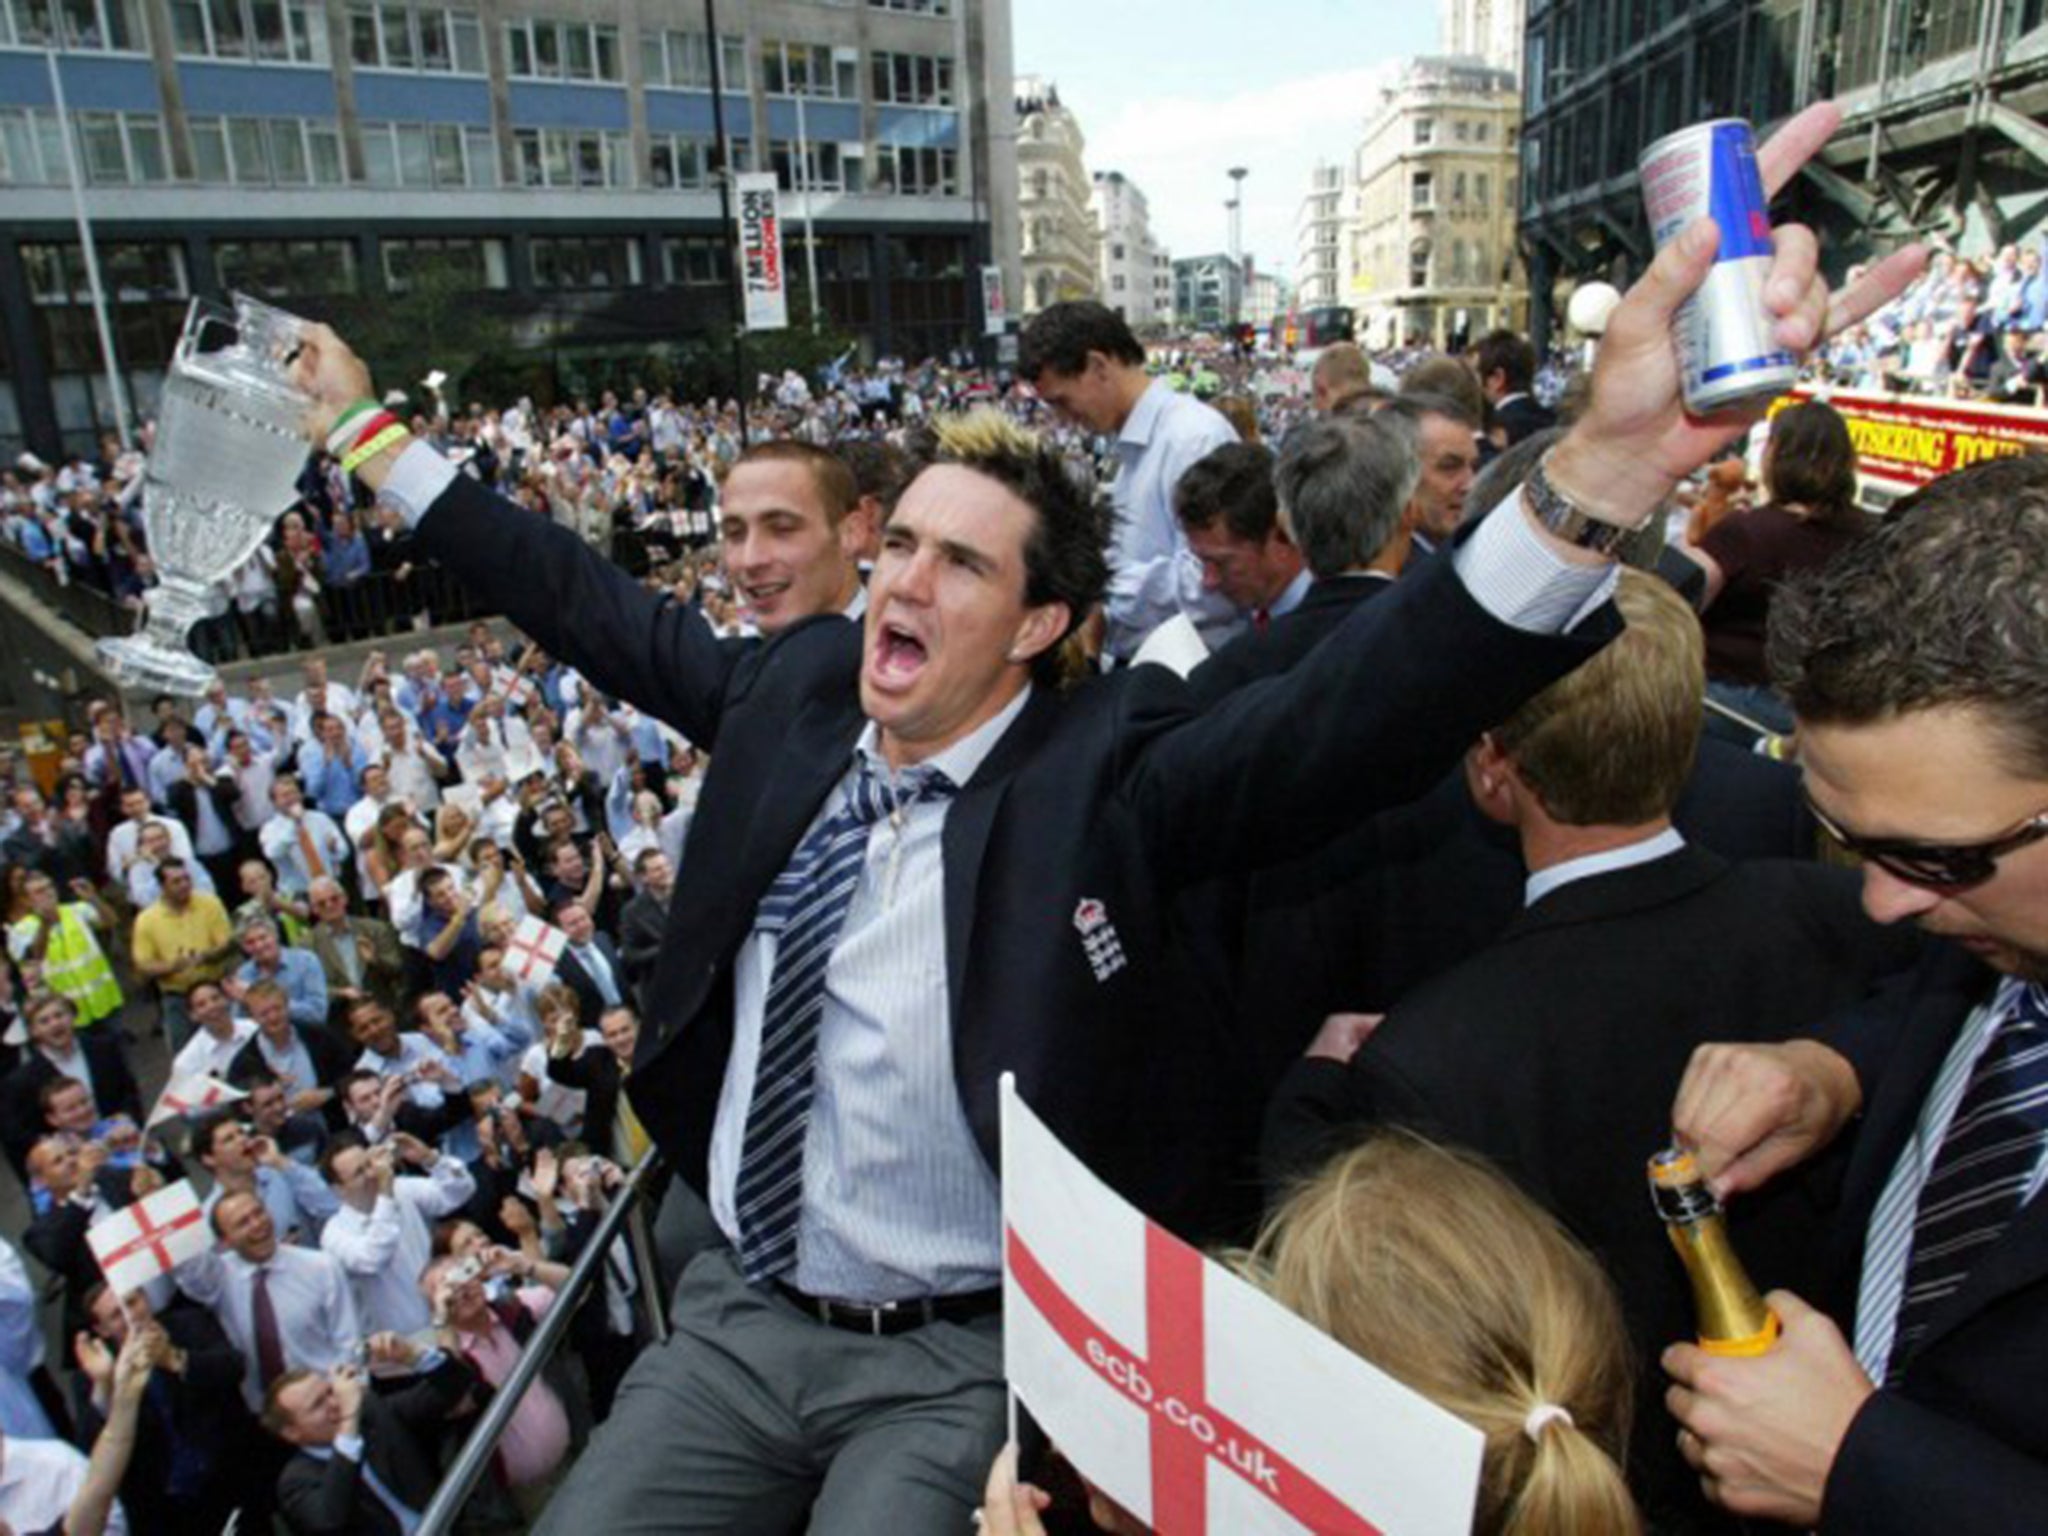 Kevin Pietersen celebrating England’s Ashes win in 2005